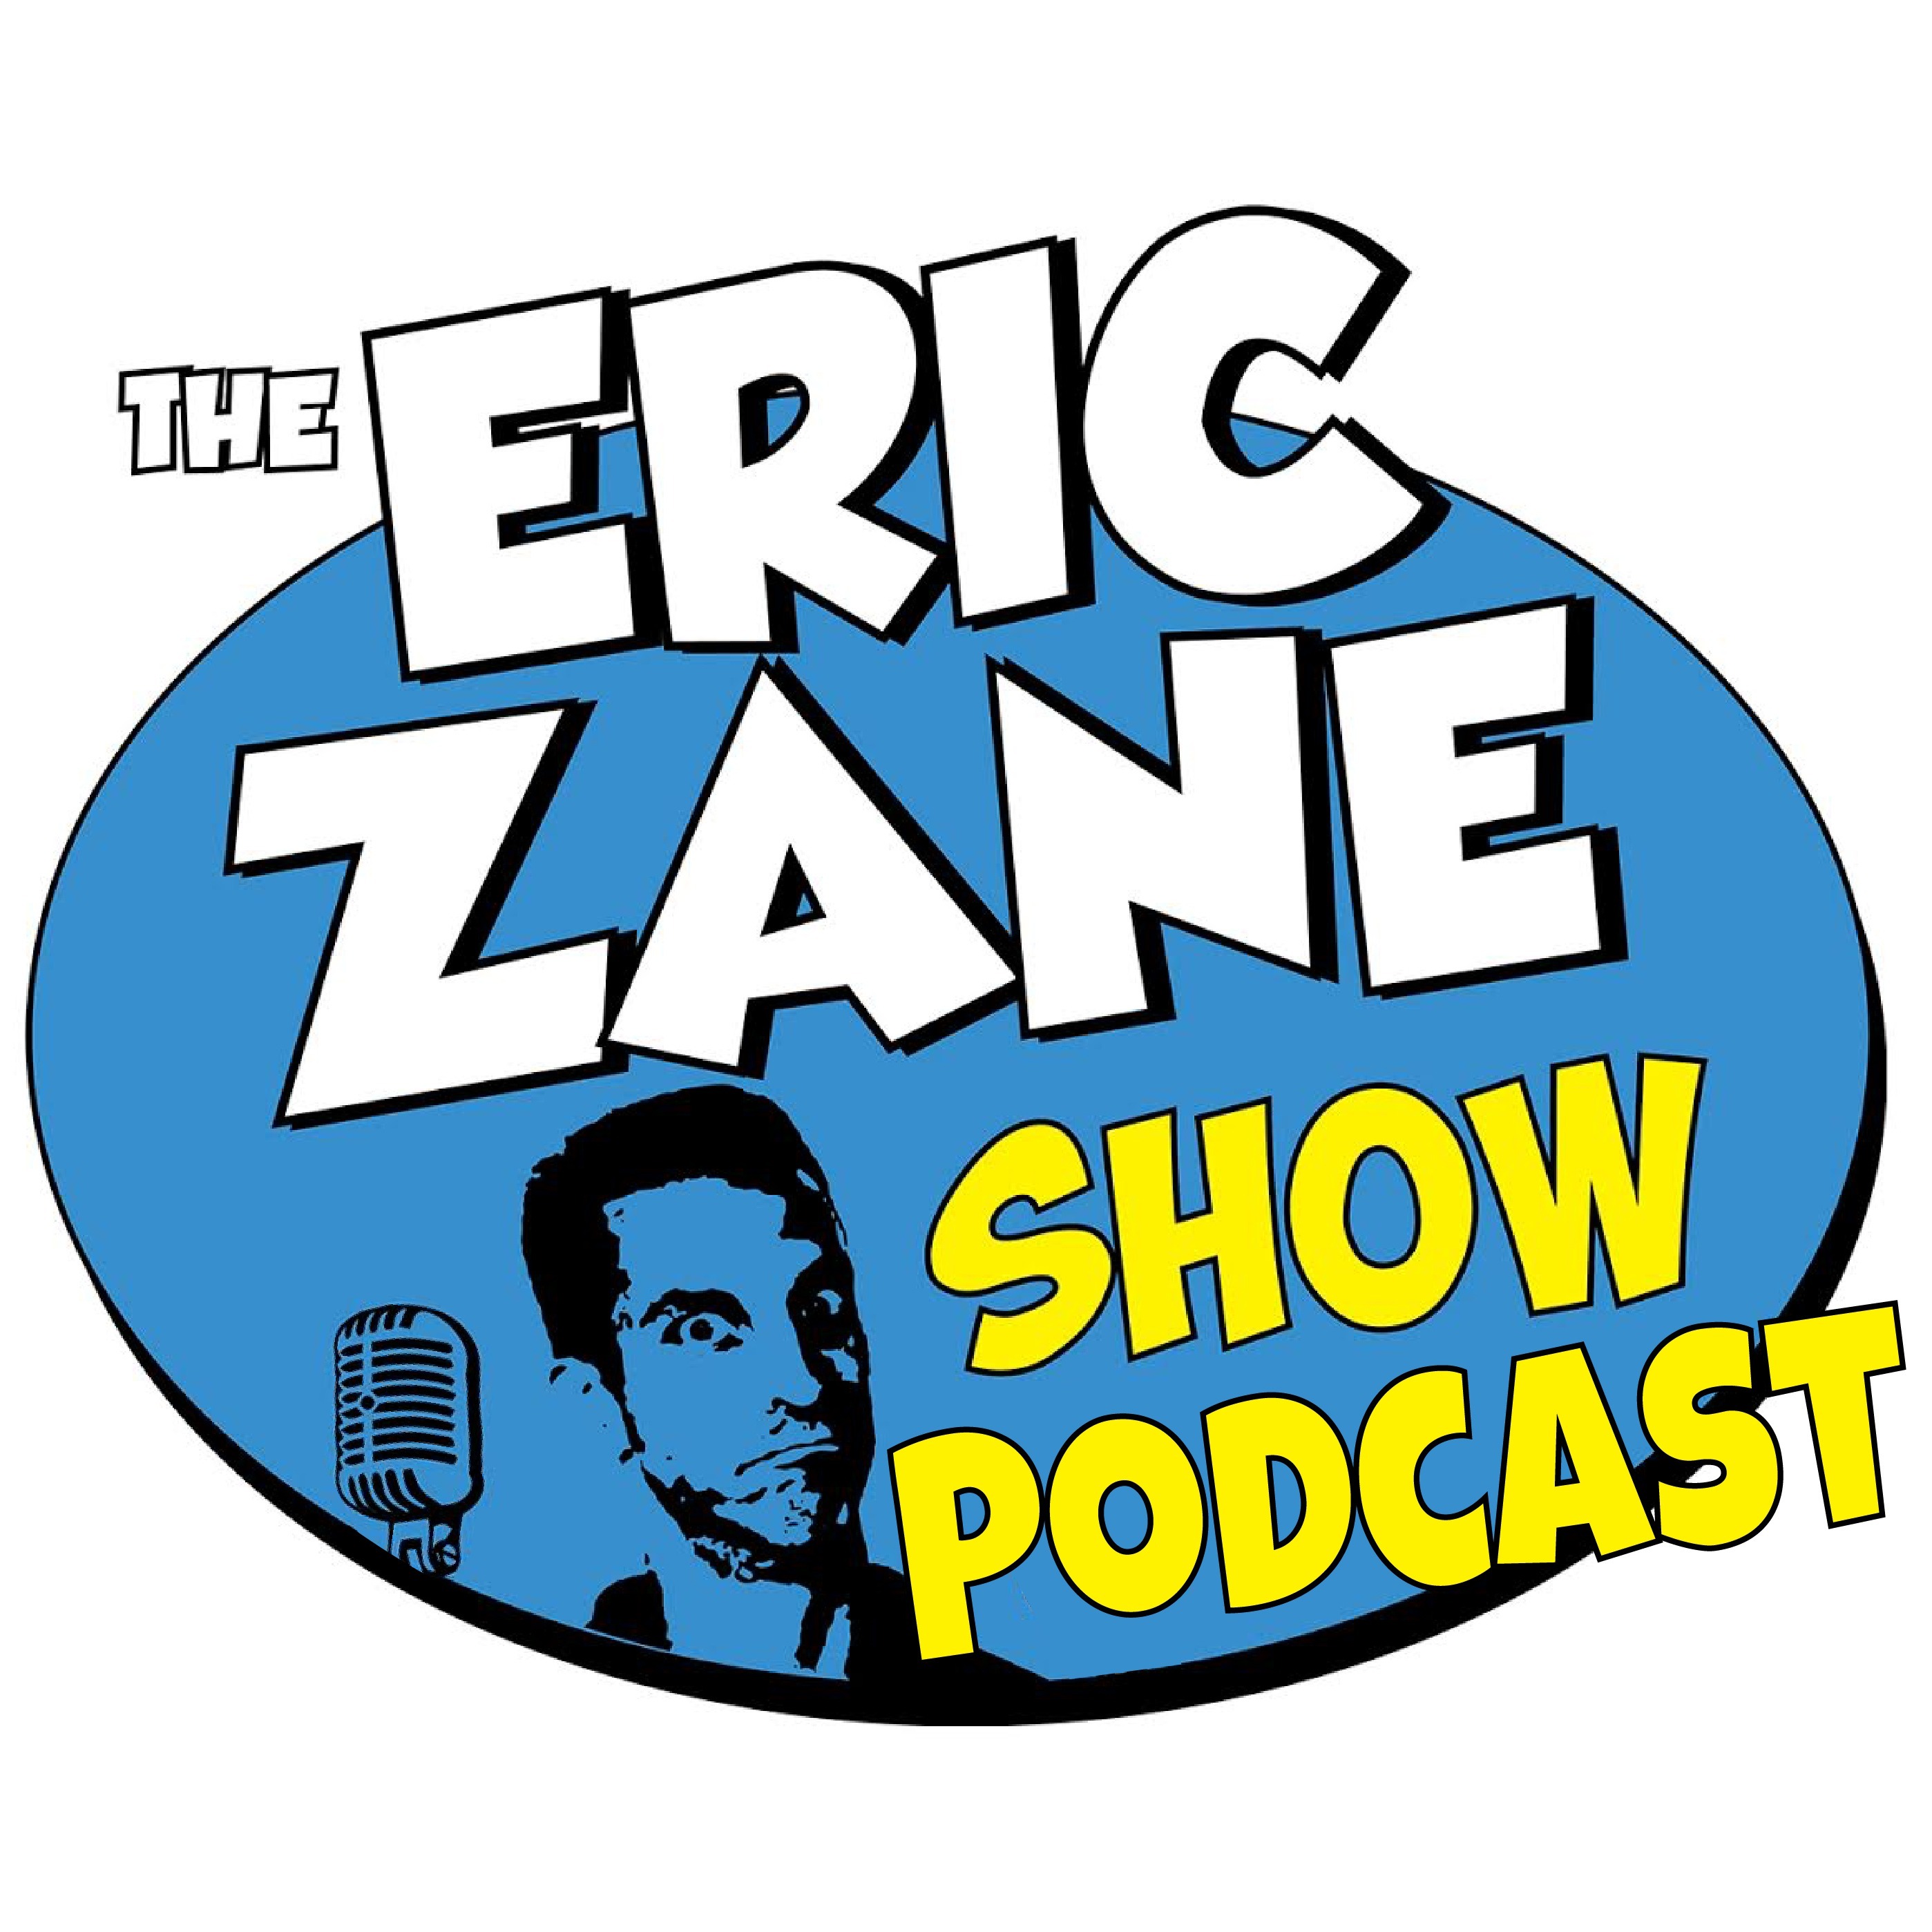 Eric Zane Show Podcast 868 A strange thing happened at the Honk Kong boy band concert.